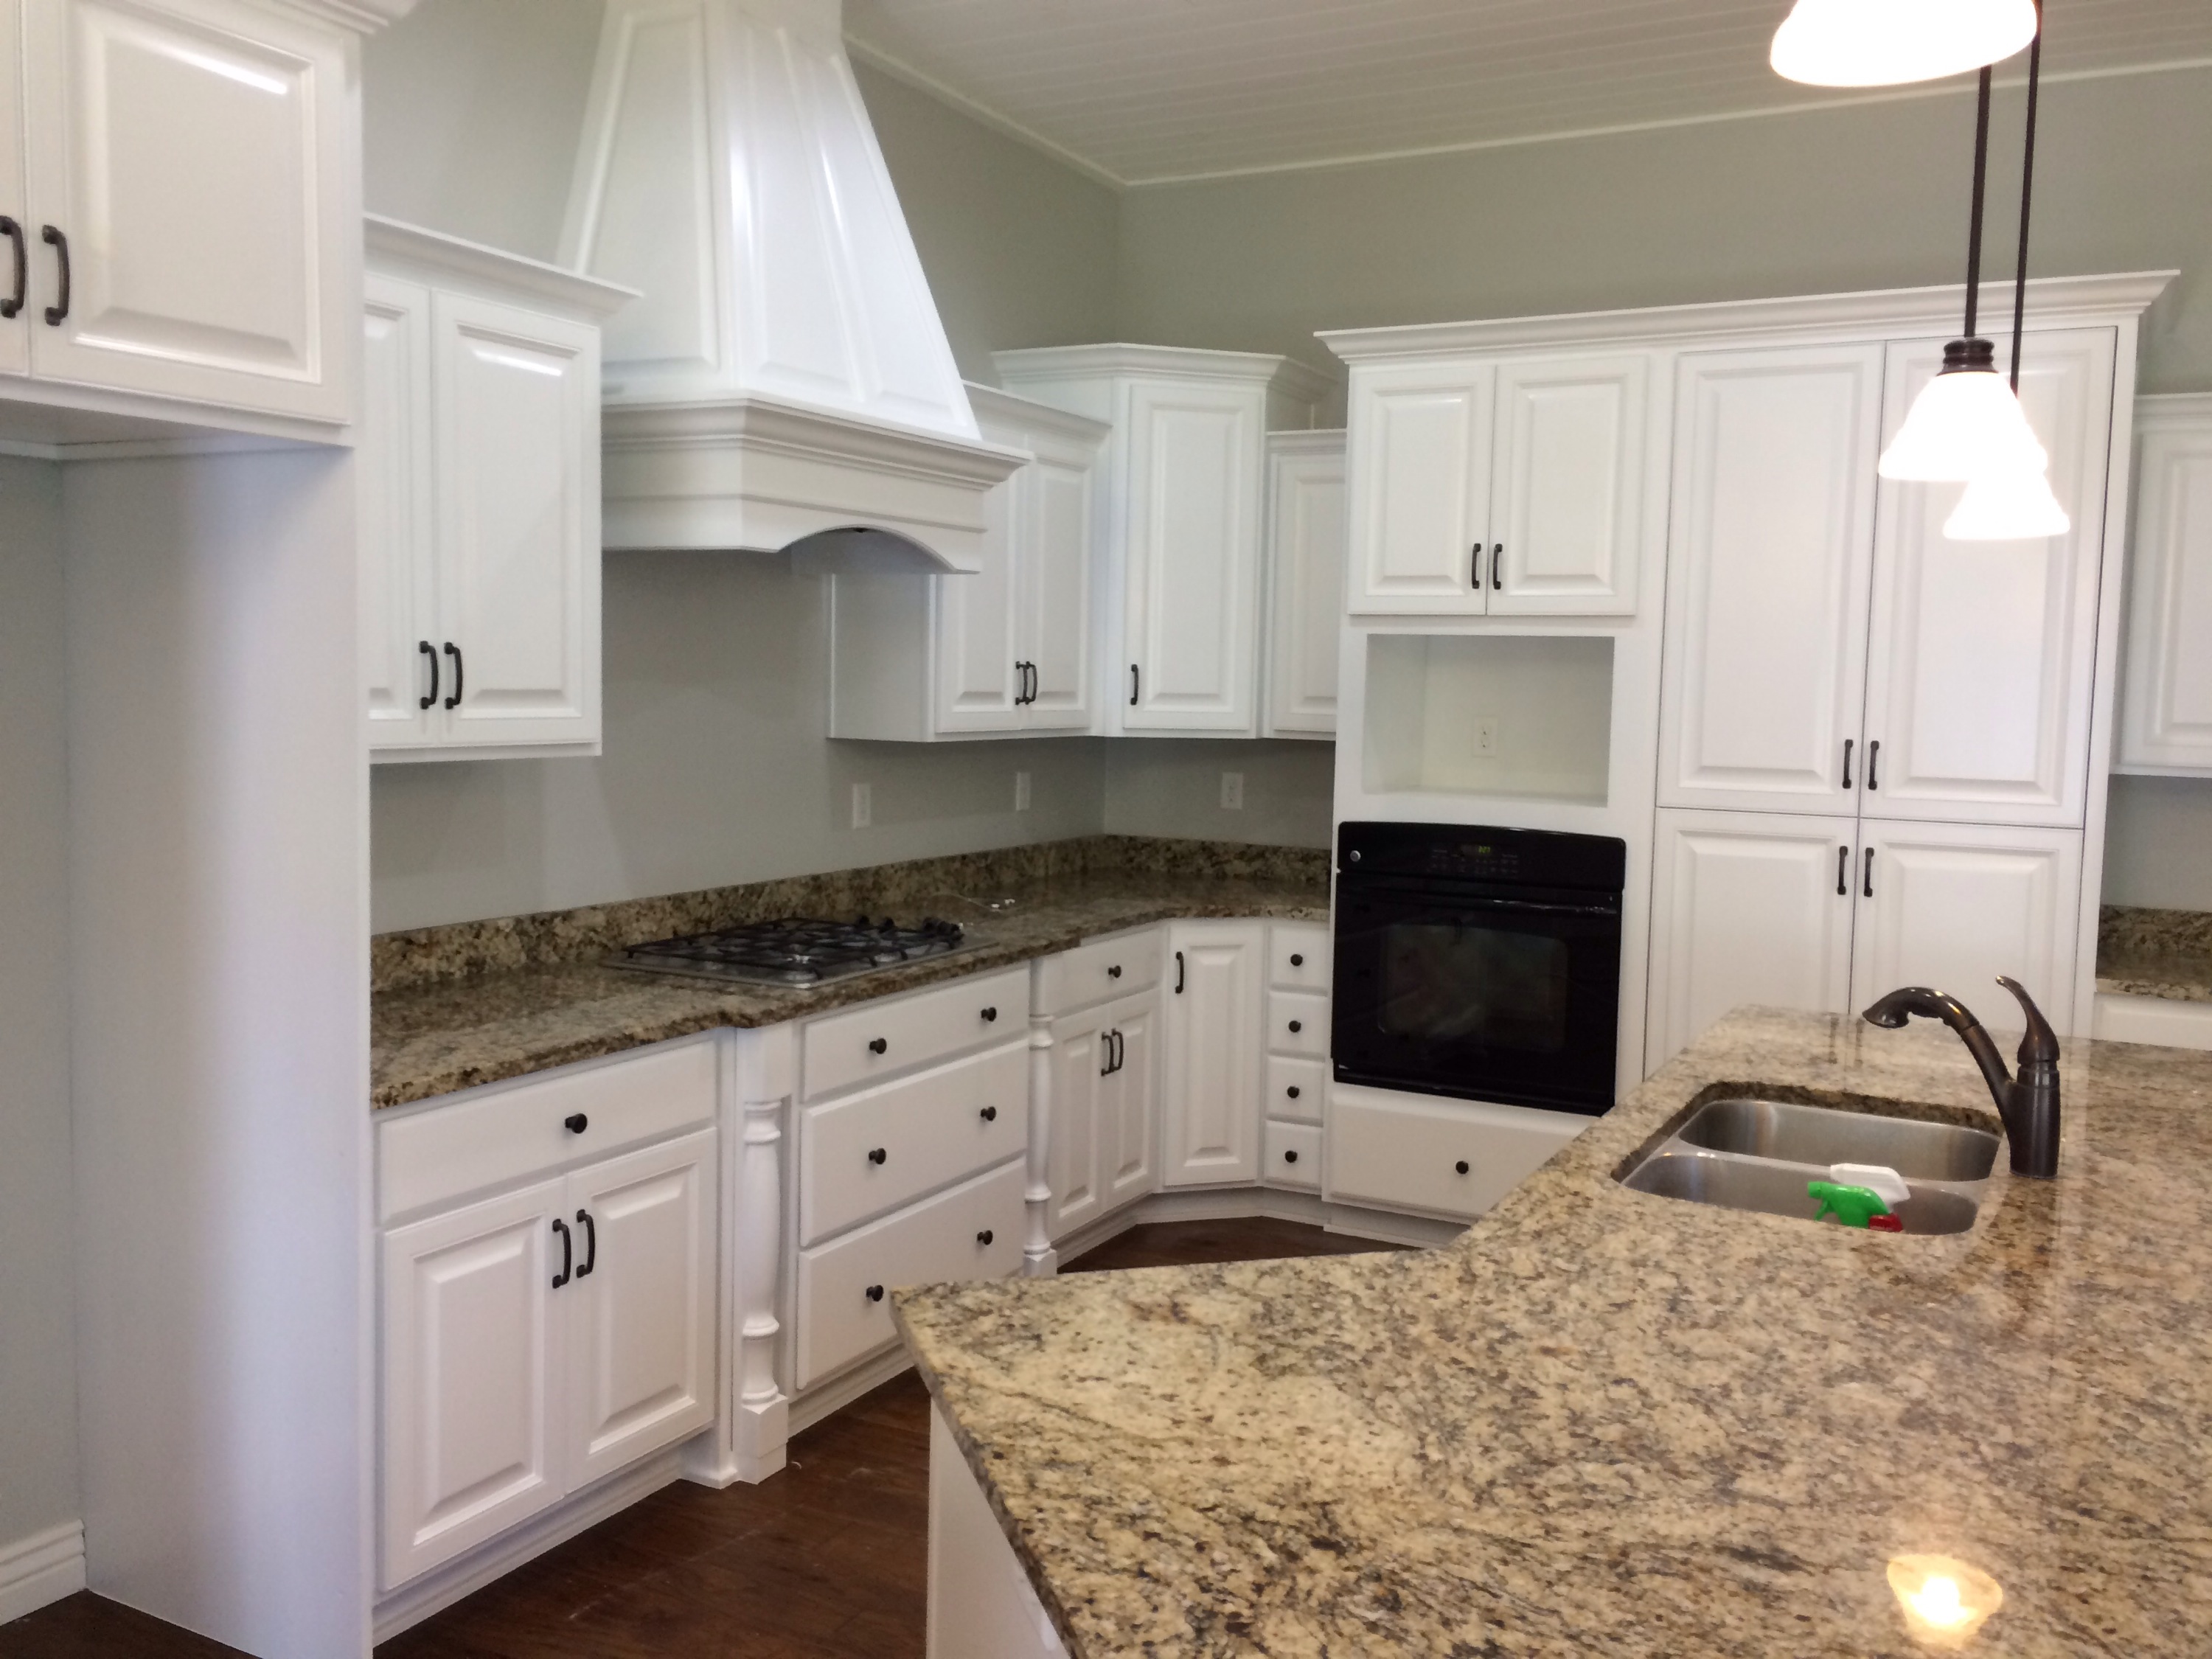 Knotty Alder Kitchen Cabinets And Range After Being Refinished